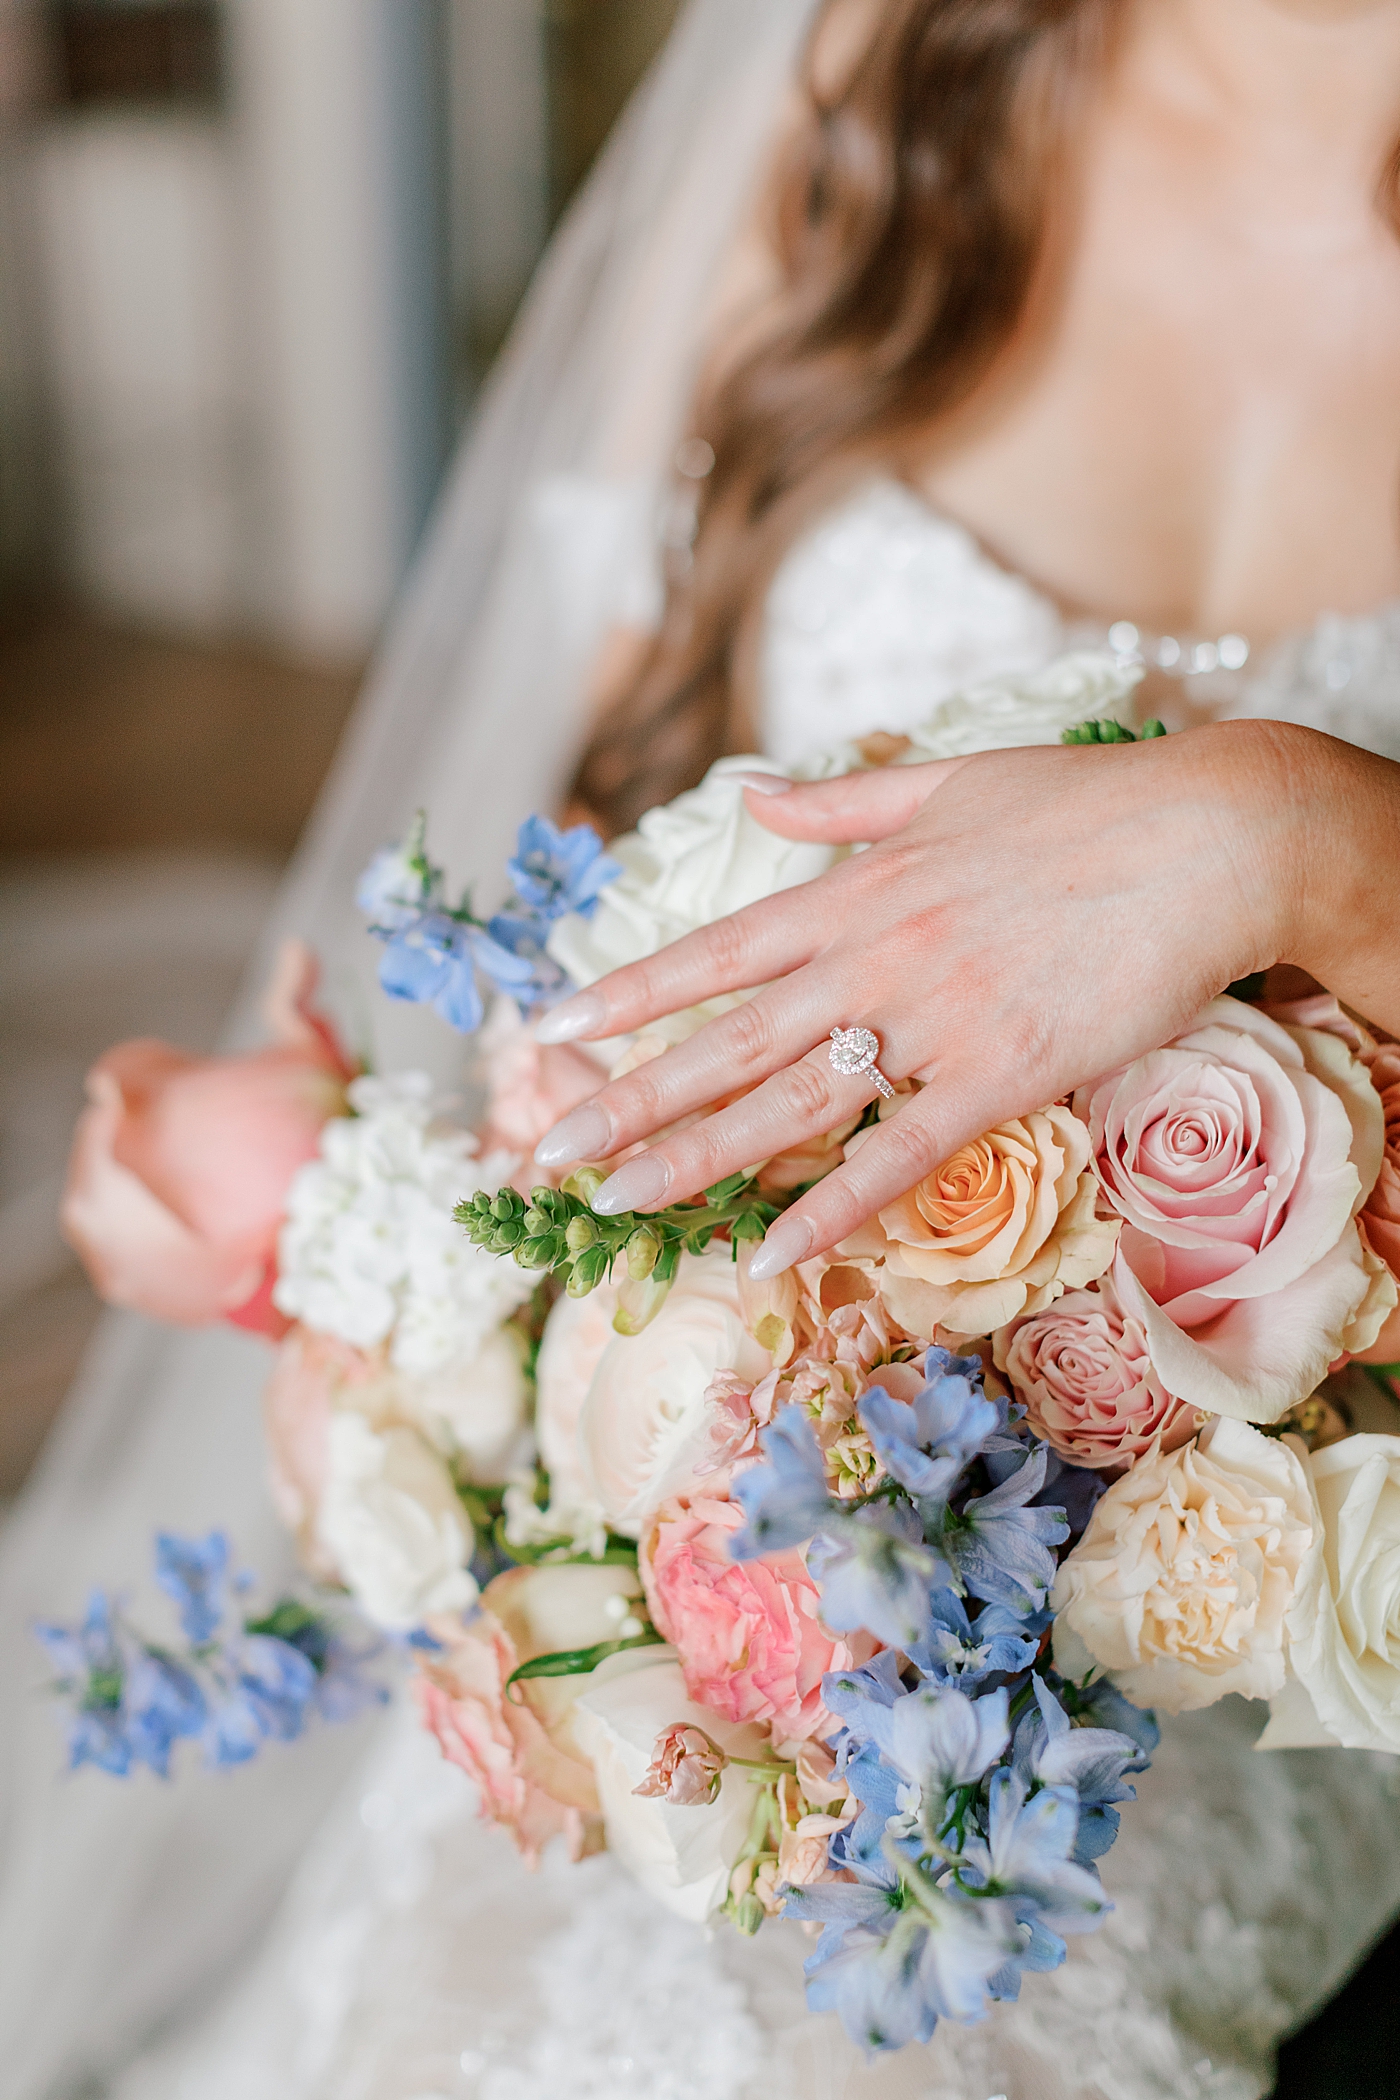 Details of bride's ring on her hand on her bouquet | Image by Hope Helmuth Photography 